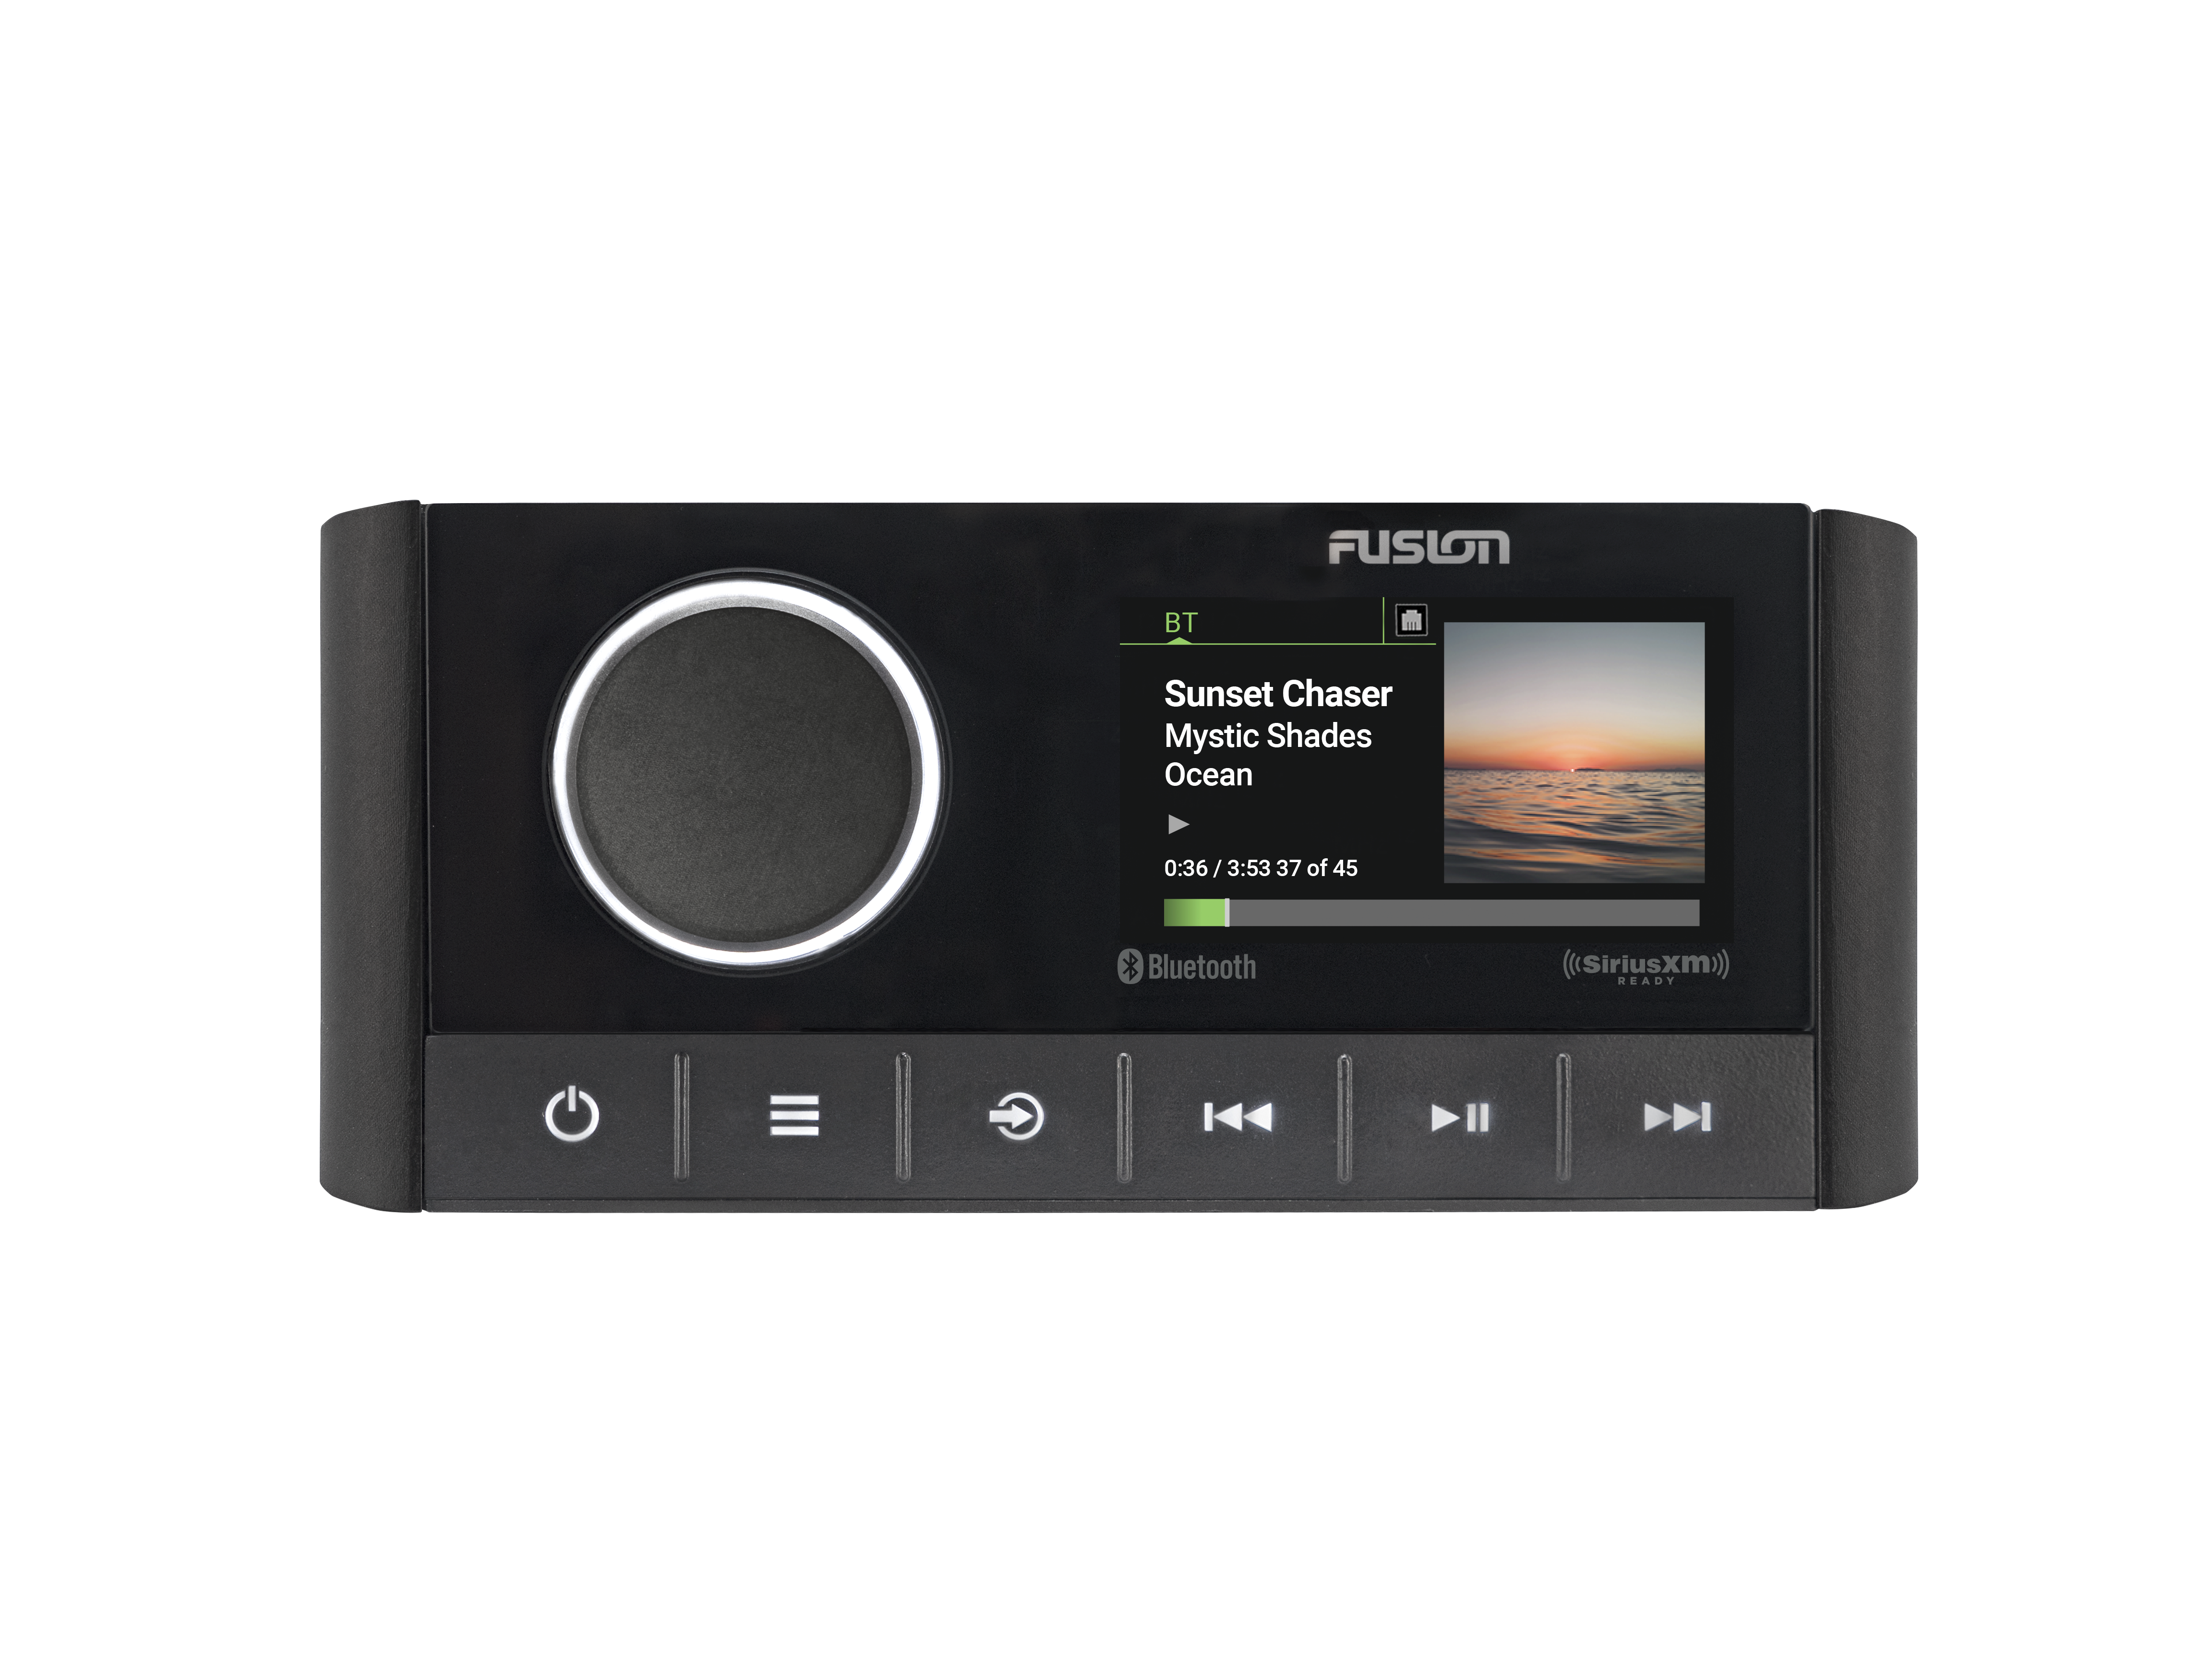 fusion ra670 stereo front view